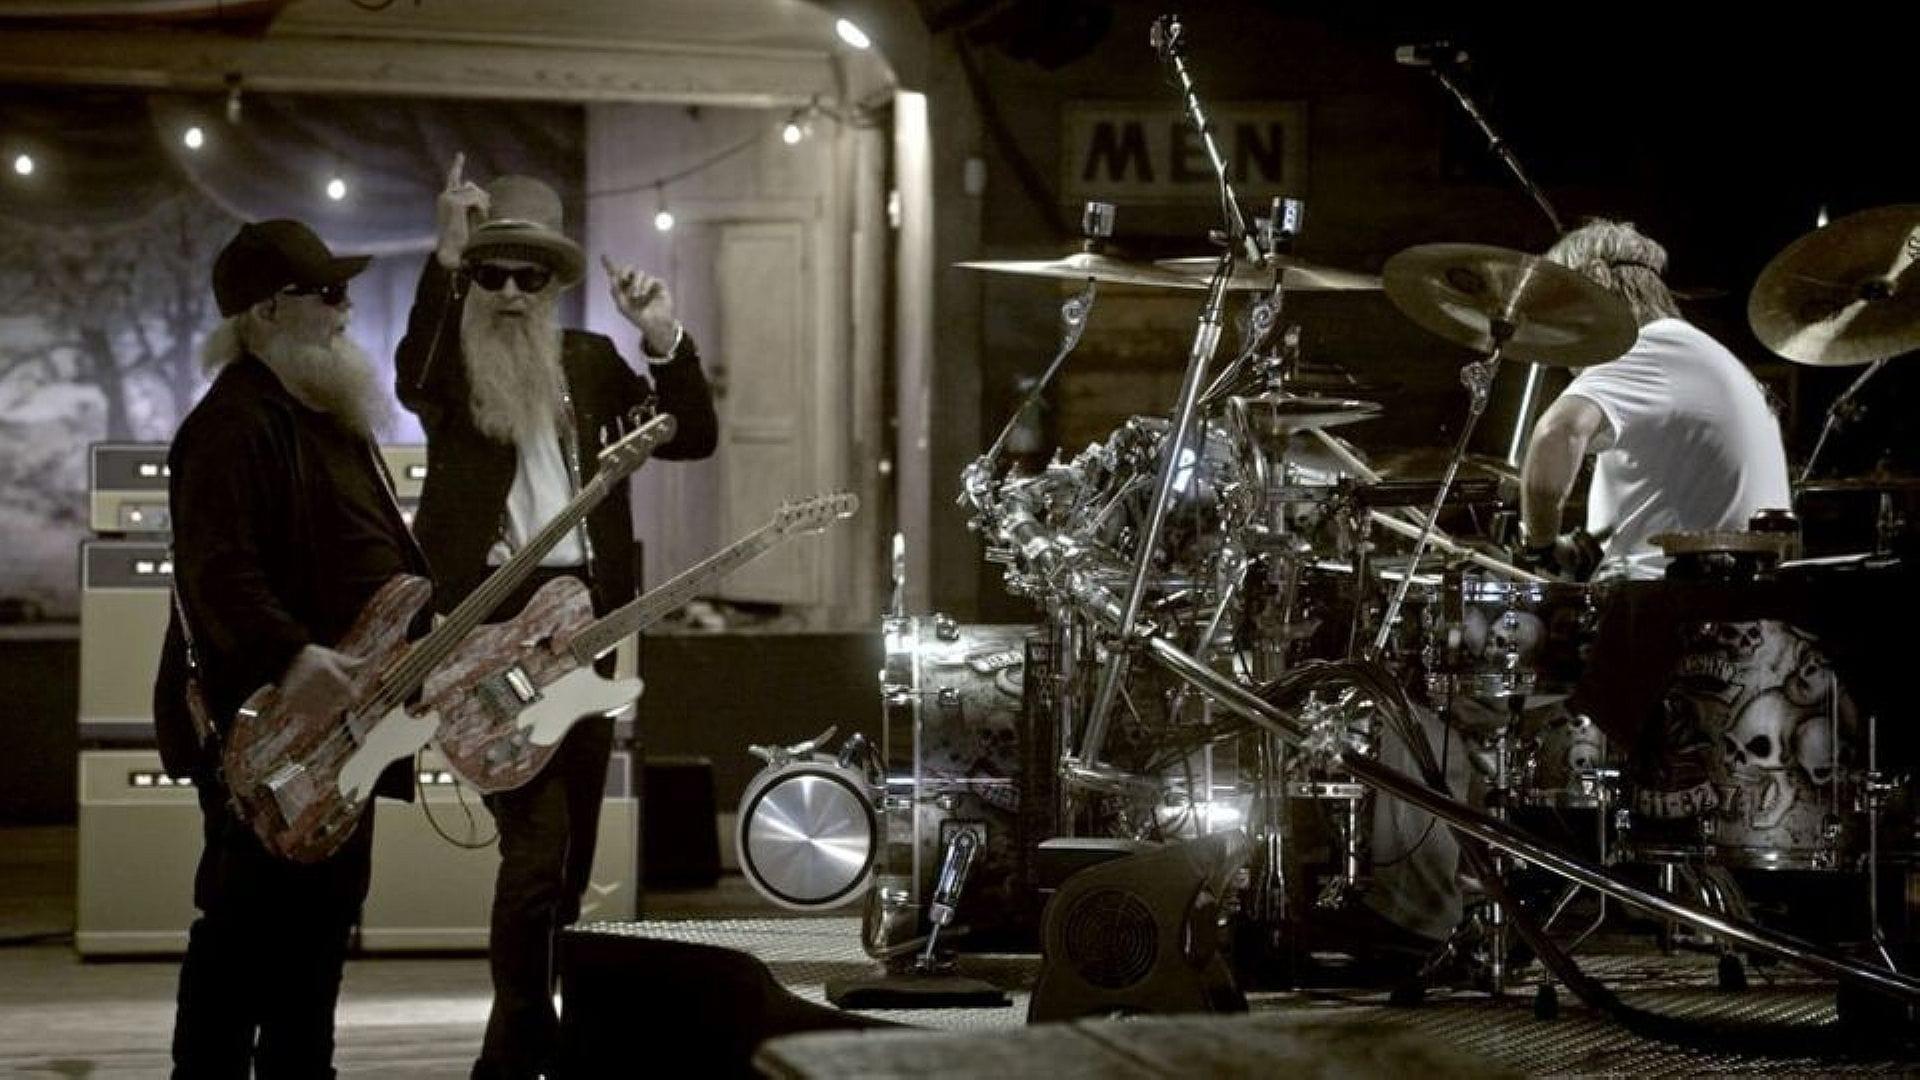 ZZ Top - That Little Ol' Band from Texas backdrop